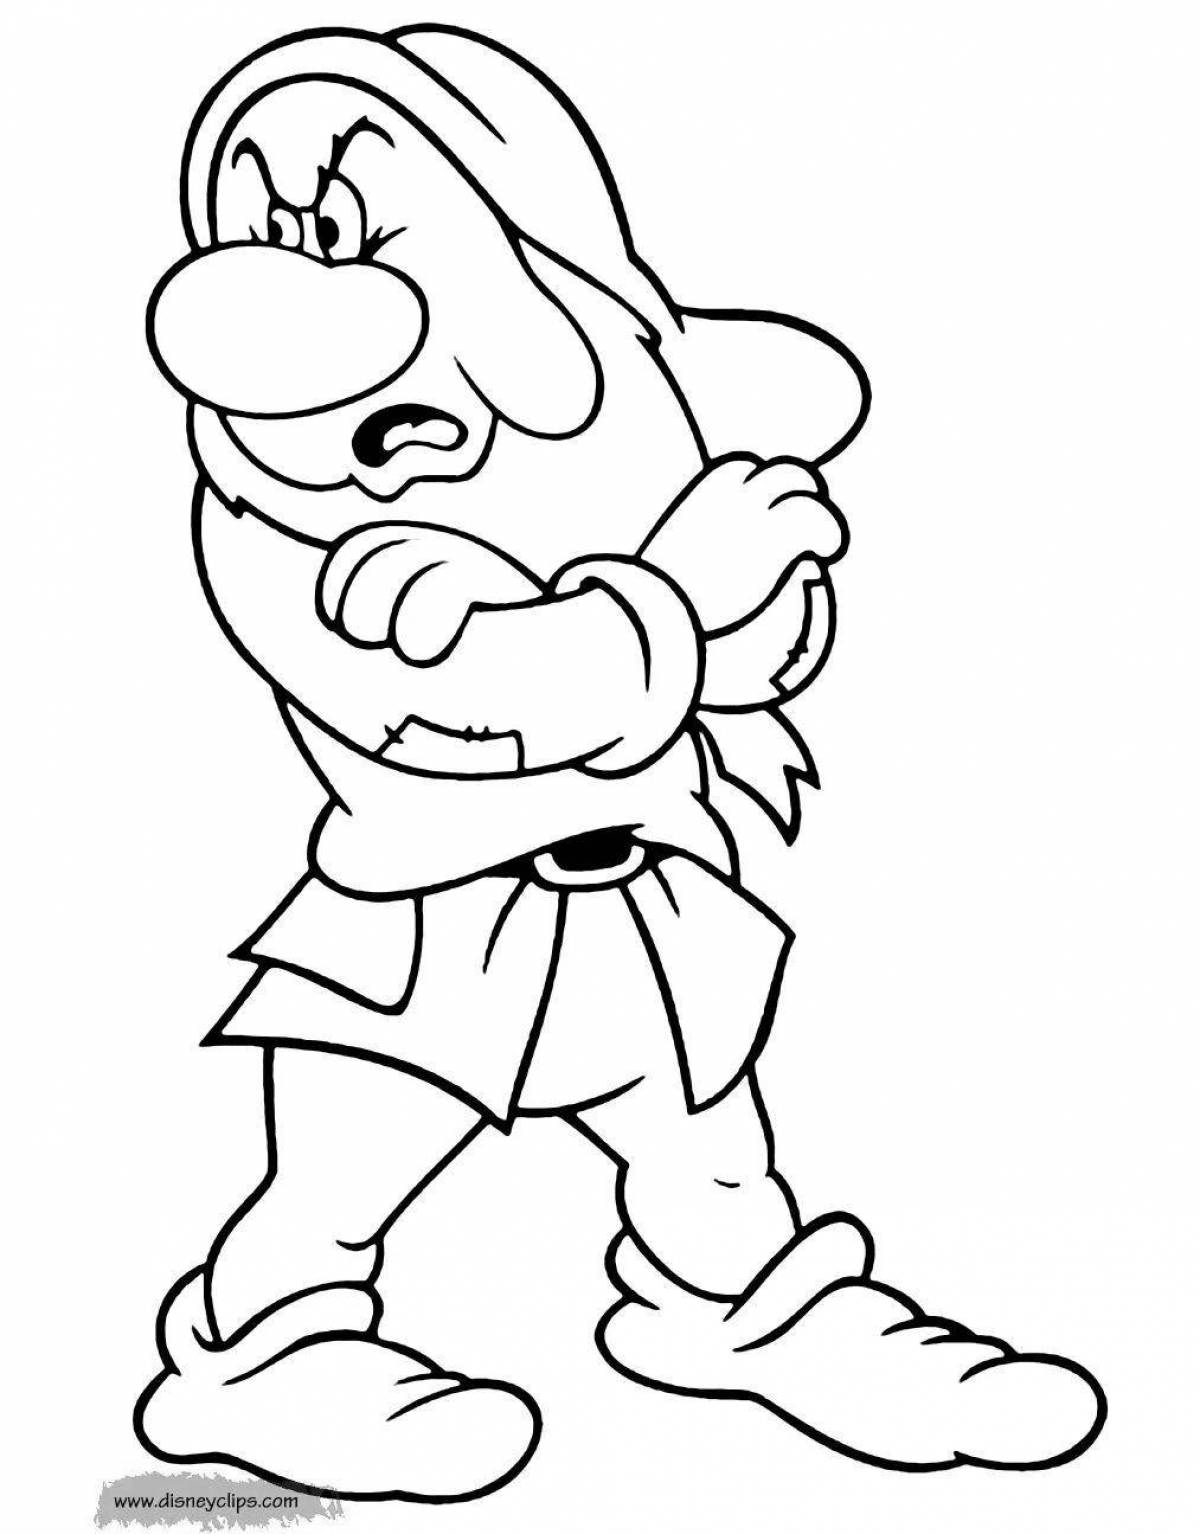 Glowing gnome coloring page